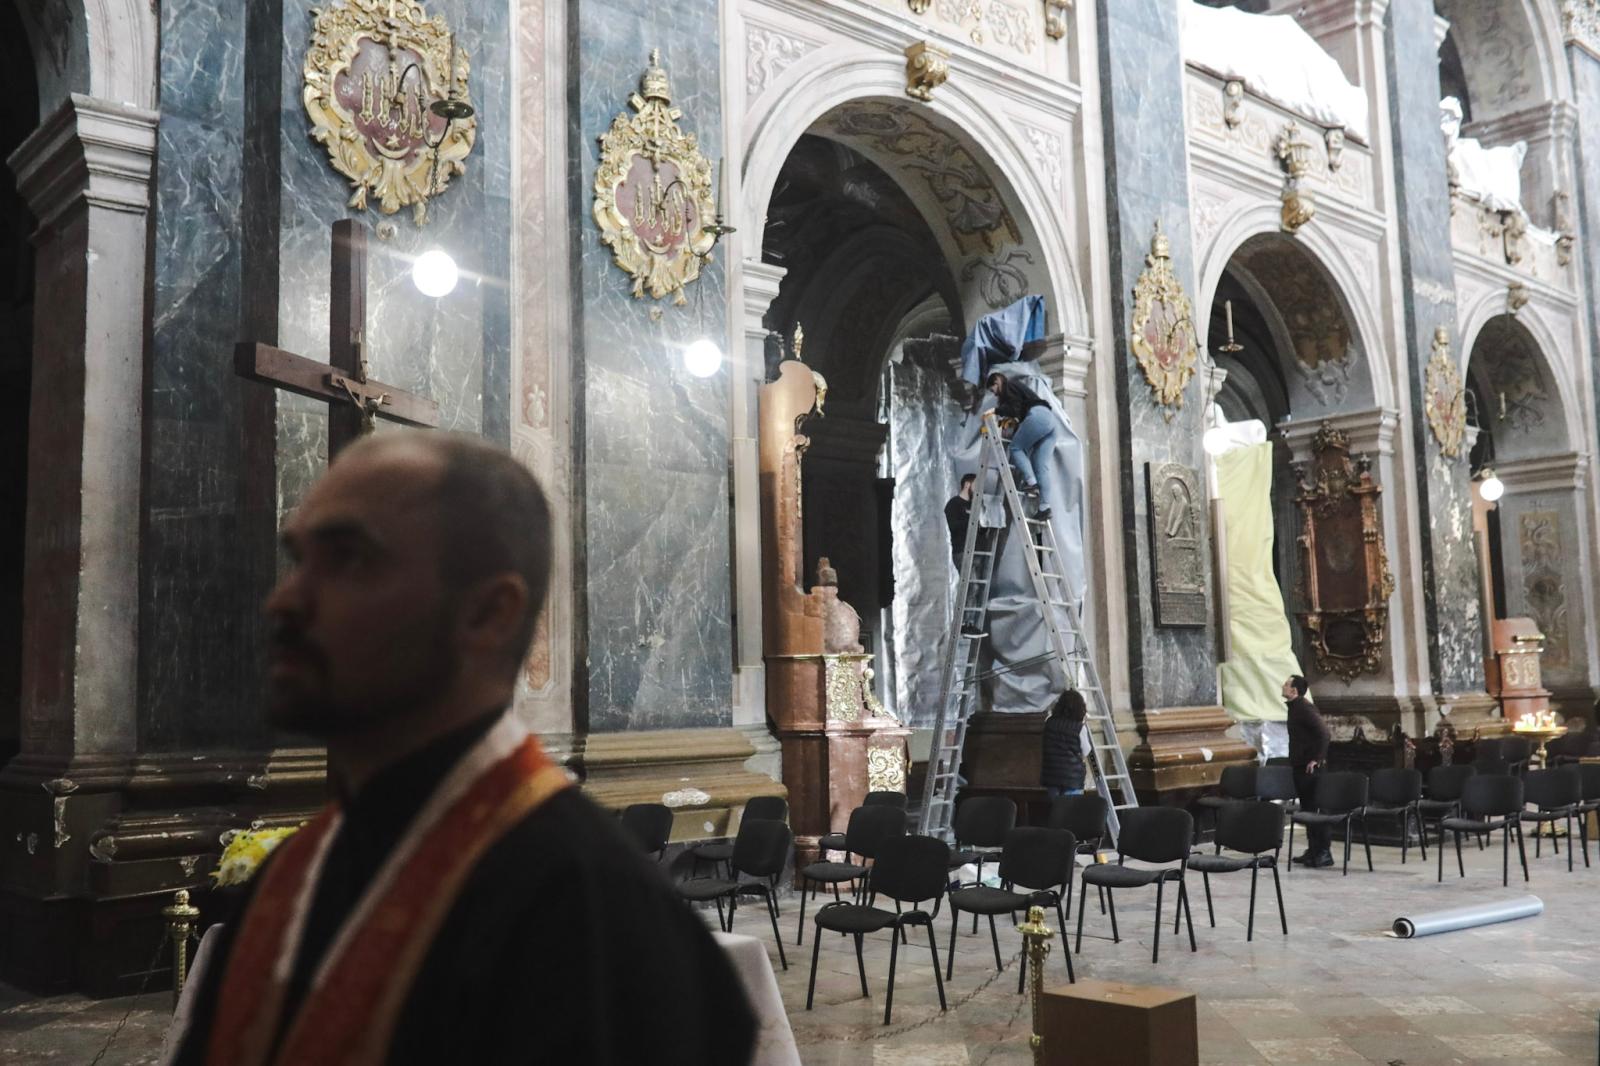 Anadolu/Getty - Easter gathering at Saints Peter and Paul Church in Lviv amid Russian attacks - For some affected by this war, religion has become a...